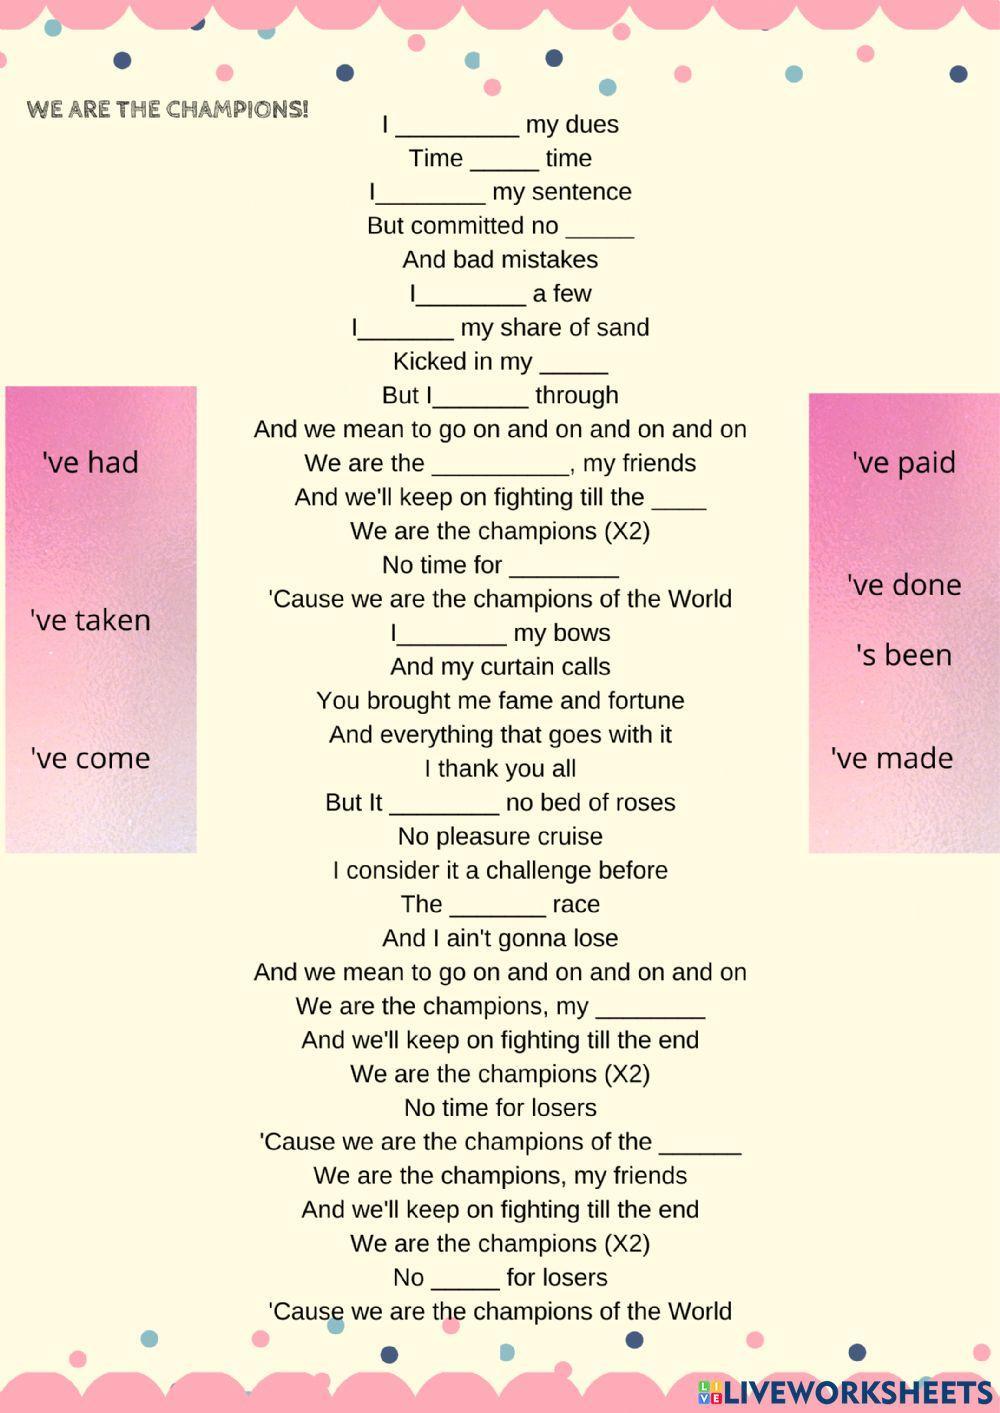 Present perfect song